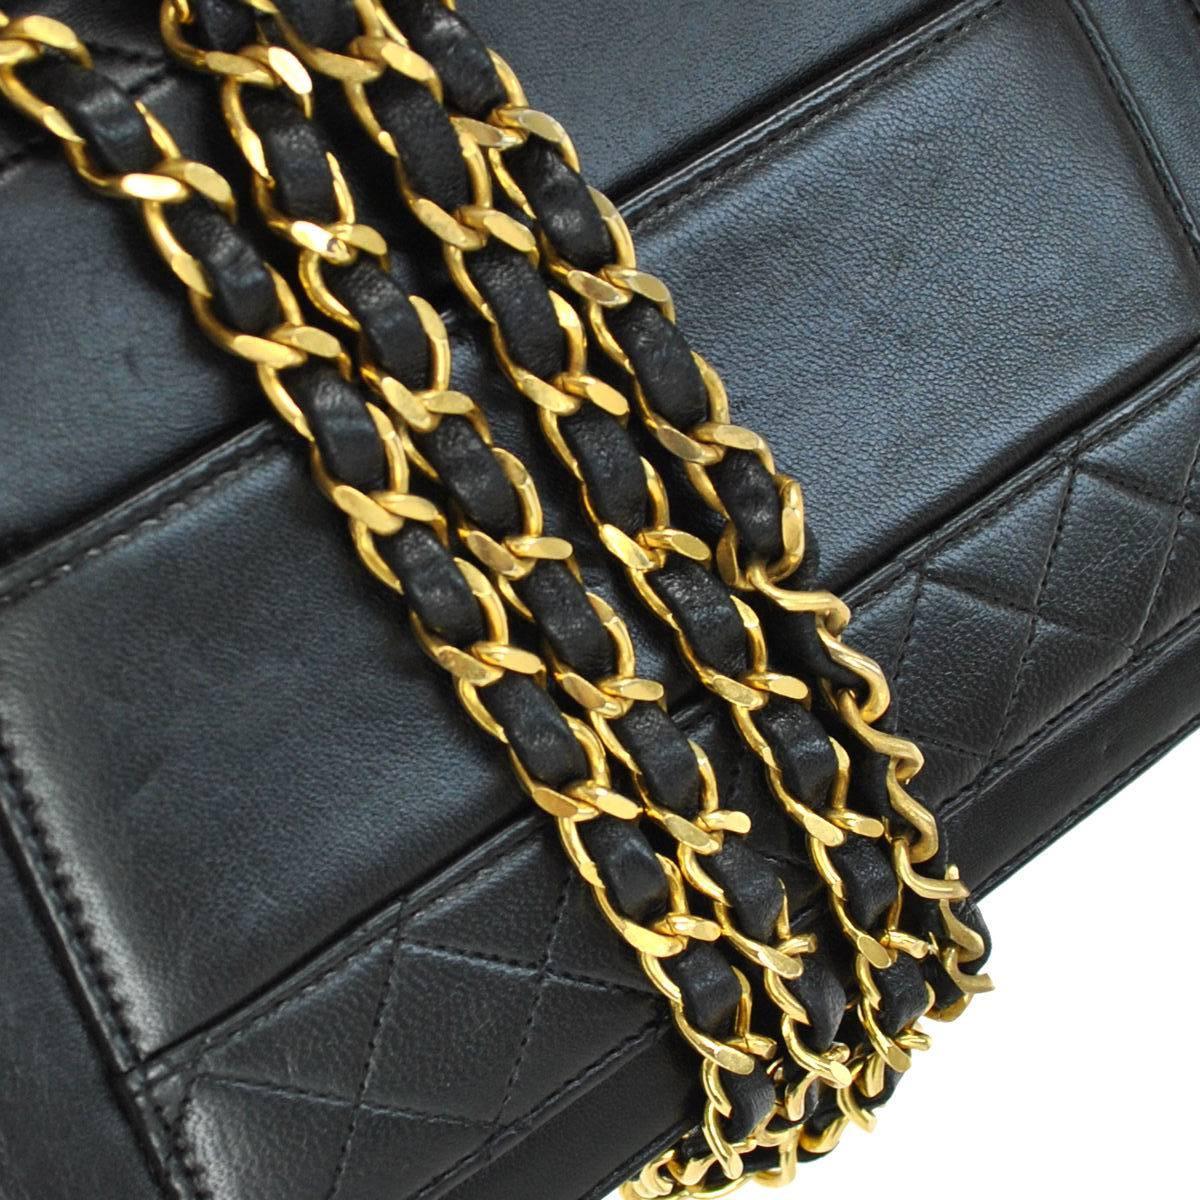 CURATOR'S NOTES

Chanel Vintage Black Lambskin Evening Gold Turnlock Kelly Box Flap Bag in Box 

A rare vintage Chanel gem with original accessories.  Expecting a quick sale on this beauty.

Lambskin
Gold tone hardware
Turnlock closure
Leather